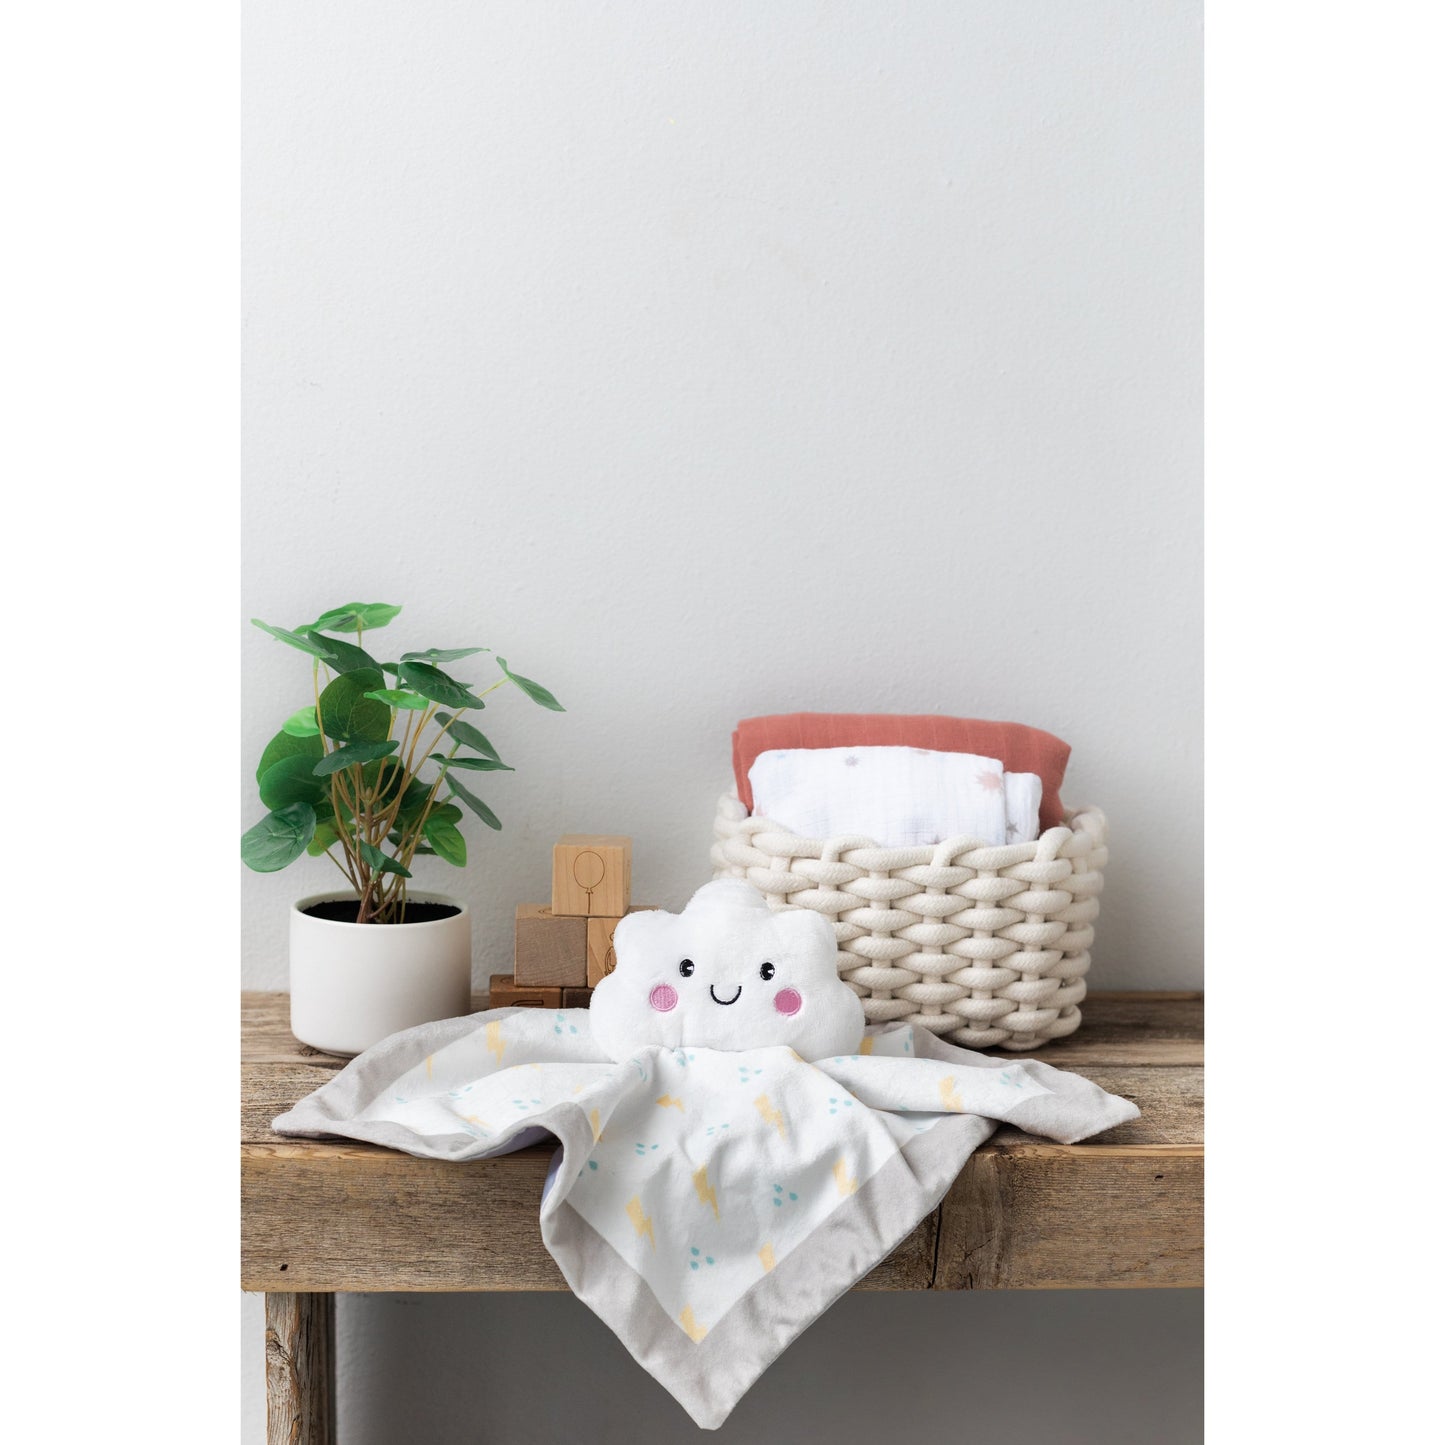 White Cloud Lovey Security Blanket